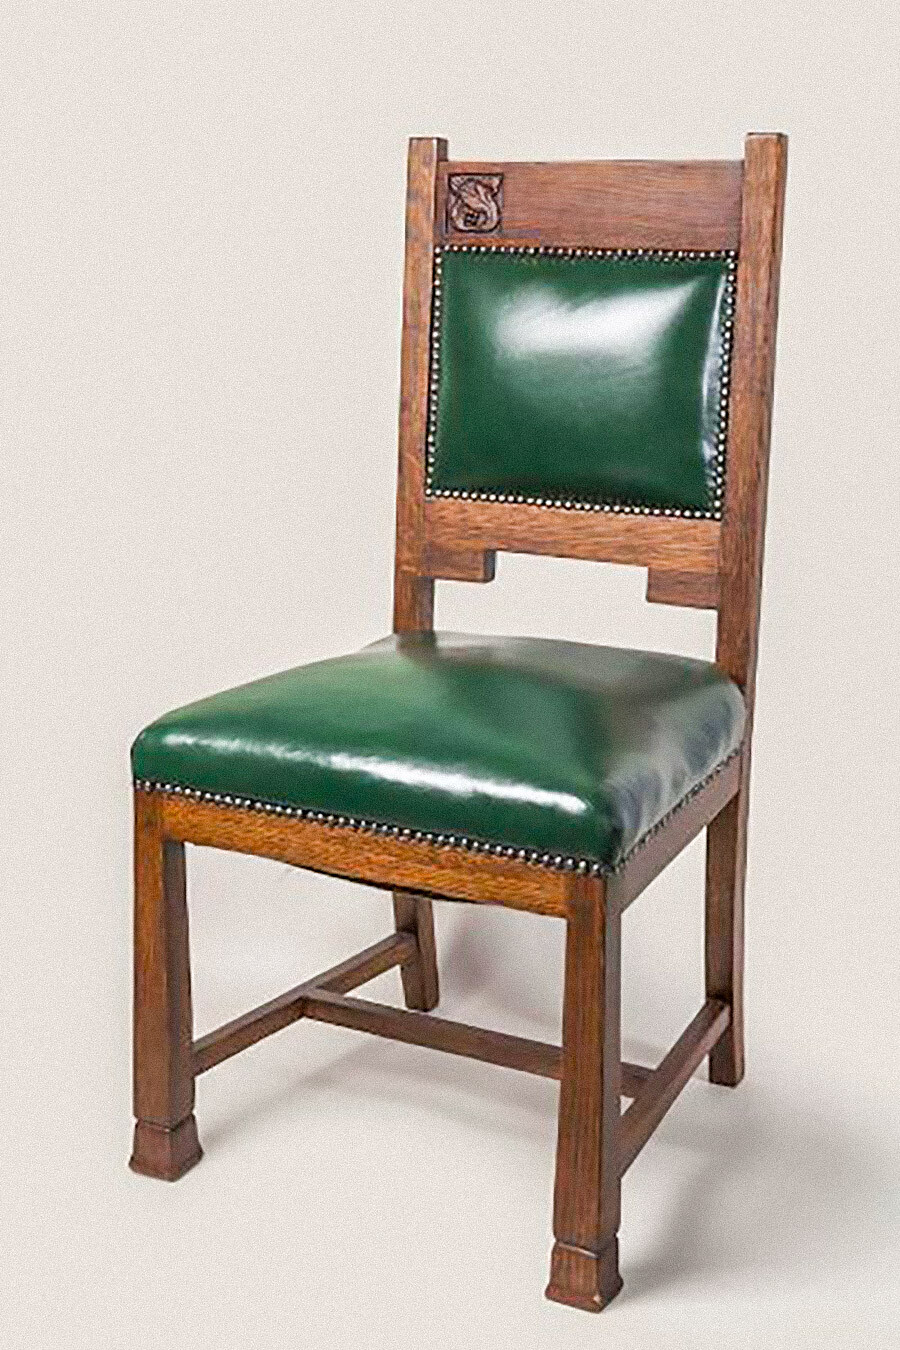 A chair produced at the ‘Muir & Mirrielees’ furniture factory. Early 20th century